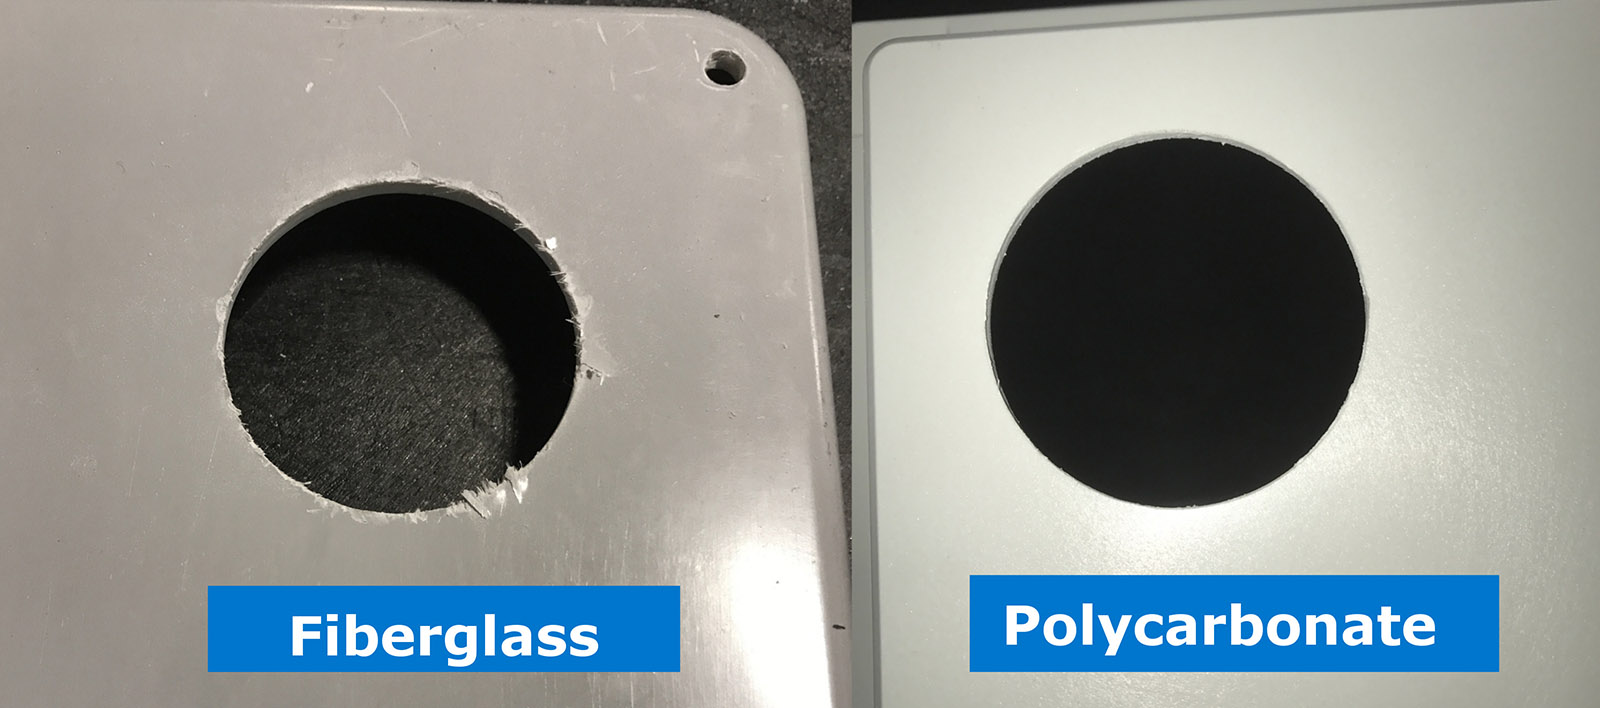 Fiberglass and polycarbonate enclosures side-by-side